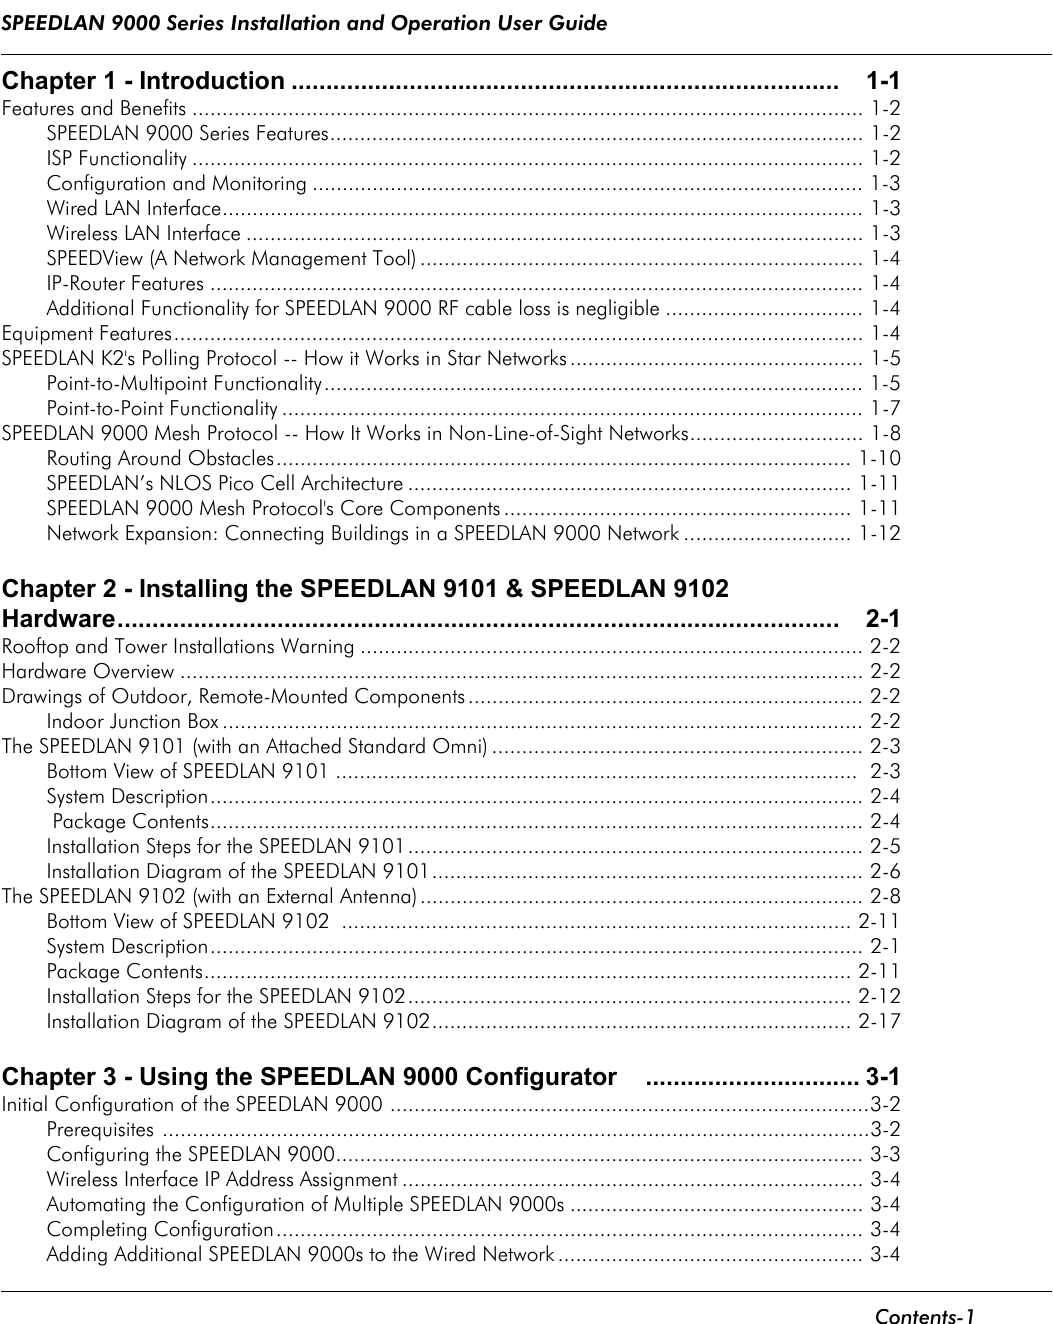 SPEEDLAN 9000 Series Installation and Operation User Guide      Contents-1                                                                                                                                                              Chapter 1 - Introduction ............................................................................... 1-1Features and Benefits ................................................................................................................ 1-2SPEEDLAN 9000 Series Features......................................................................................... 1-2ISP Functionality ................................................................................................................ 1-2Configuration and Monitoring ............................................................................................ 1-3Wired LAN Interface........................................................................................................... 1-3Wireless LAN Interface ....................................................................................................... 1-3SPEEDView (A Network Management Tool) .......................................................................... 1-4IP-Router Features ............................................................................................................. 1-4Additional Functionality for SPEEDLAN 9000 RF cable loss is negligible ................................. 1-4Equipment Features................................................................................................................... 1-4SPEEDLAN K2&apos;s Polling Protocol -- How it Works in Star Networks ................................................. 1-5Point-to-Multipoint Functionality.......................................................................................... 1-5Point-to-Point Functionality ................................................................................................. 1-7SPEEDLAN 9000 Mesh Protocol -- How It Works in Non-Line-of-Sight Networks............................. 1-8Routing Around Obstacles................................................................................................ 1-10SPEEDLAN’s NLOS Pico Cell Architecture .......................................................................... 1-11SPEEDLAN 9000 Mesh Protocol&apos;s Core Components .......................................................... 1-11Network Expansion: Connecting Buildings in a SPEEDLAN 9000 Network ............................ 1-12Chapter 2 - Installing the SPEEDLAN 9101 &amp; SPEEDLAN 9102 Hardware........................................................................................................ 2-1Rooftop and Tower Installations Warning .................................................................................... 2-2Hardware Overview .................................................................................................................. 2-2Drawings of Outdoor, Remote-Mounted Components .................................................................. 2-2Indoor Junction Box ........................................................................................................... 2-2The SPEEDLAN 9101 (with an Attached Standard Omni) .............................................................. 2-3Bottom View of SPEEDLAN 9101 .......................................................................................  2-3System Description............................................................................................................. 2-4 Package Contents............................................................................................................. 2-4Installation Steps for the SPEEDLAN 9101............................................................................ 2-5Installation Diagram of the SPEEDLAN 9101........................................................................ 2-6The SPEEDLAN 9102 (with an External Antenna) .......................................................................... 2-8Bottom View of SPEEDLAN 9102  ..................................................................................... 2-11System Description............................................................................................................. 2-1Package Contents............................................................................................................ 2-11Installation Steps for the SPEEDLAN 9102.......................................................................... 2-12Installation Diagram of the SPEEDLAN 9102...................................................................... 2-17Chapter 3 - Using the SPEEDLAN 9000 Configurator ............................... 3-1Initial Configuration of the SPEEDLAN 9000 ................................................................................3-2Prerequisites ......................................................................................................................3-2Configuring the SPEEDLAN 9000........................................................................................ 3-3Wireless Interface IP Address Assignment ............................................................................. 3-4Automating the Configuration of Multiple SPEEDLAN 9000s ................................................. 3-4Completing Configuration.................................................................................................. 3-4Adding Additional SPEEDLAN 9000s to the Wired Network ................................................... 3-4